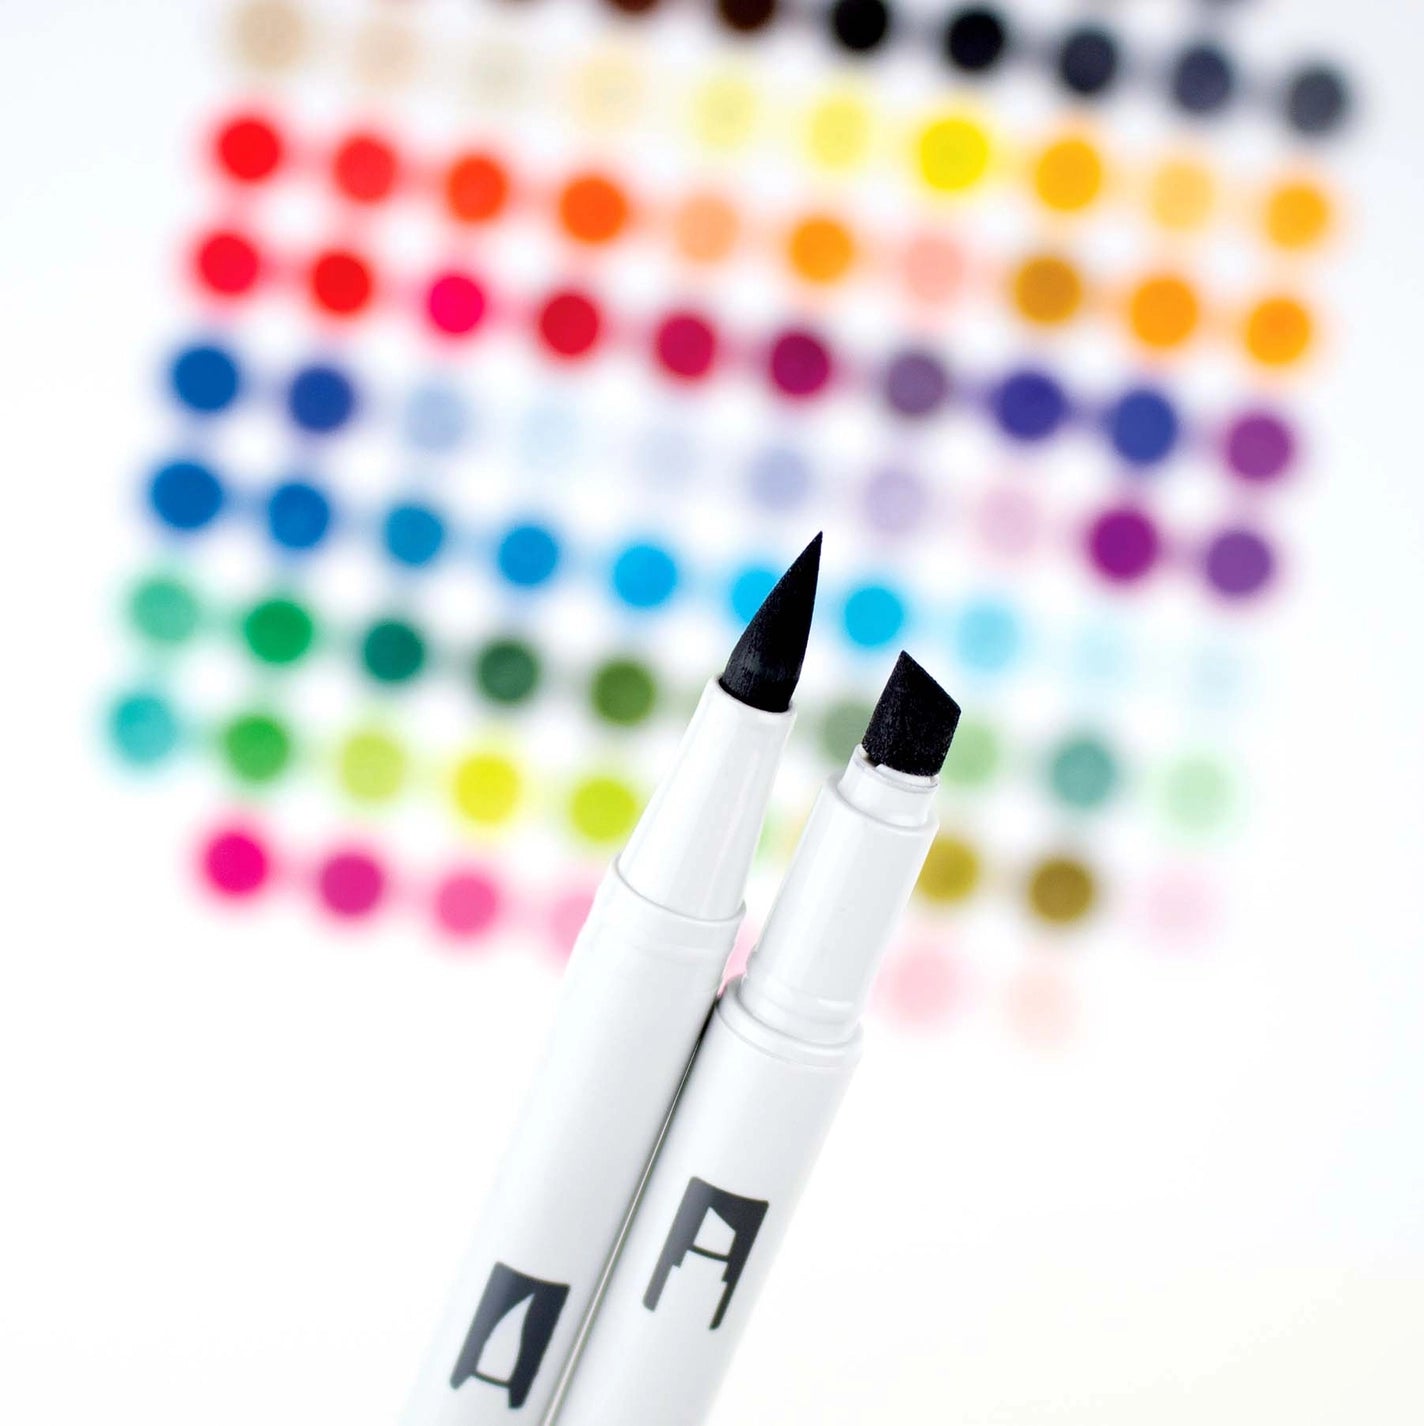 NEW // Tombow ABT Pro Alcohol-Based Art Markers - Bold (10)